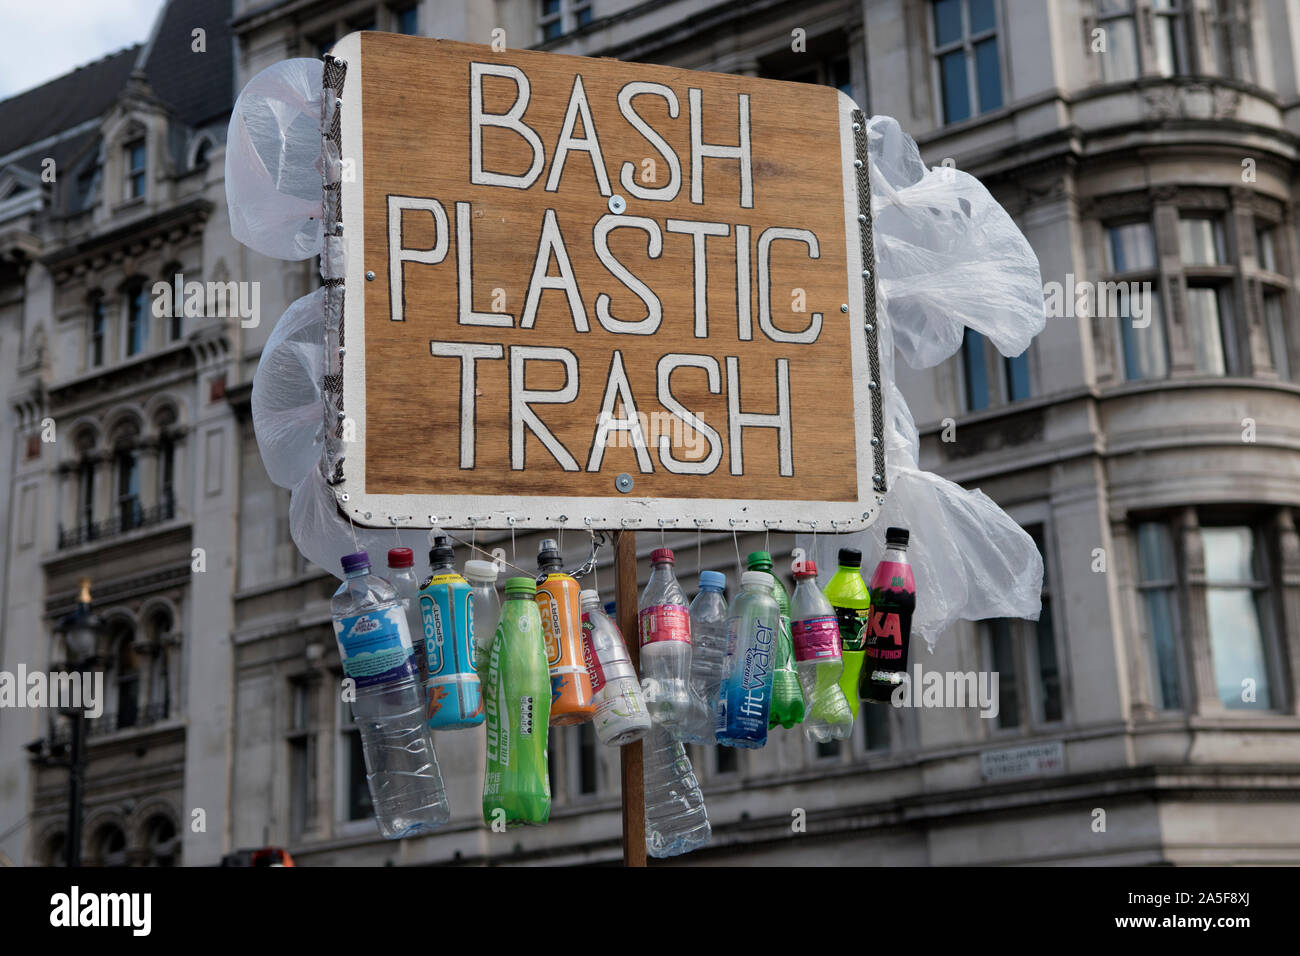 Plastic protest London UK 2019. Robert Unbranded demonstrates in Westminster,  holding up a Bash Plastic Trash poster sign, with one use plastic bottles and plastic bags hanging from it. England 2010s. HOMER SYKES Stock Photo